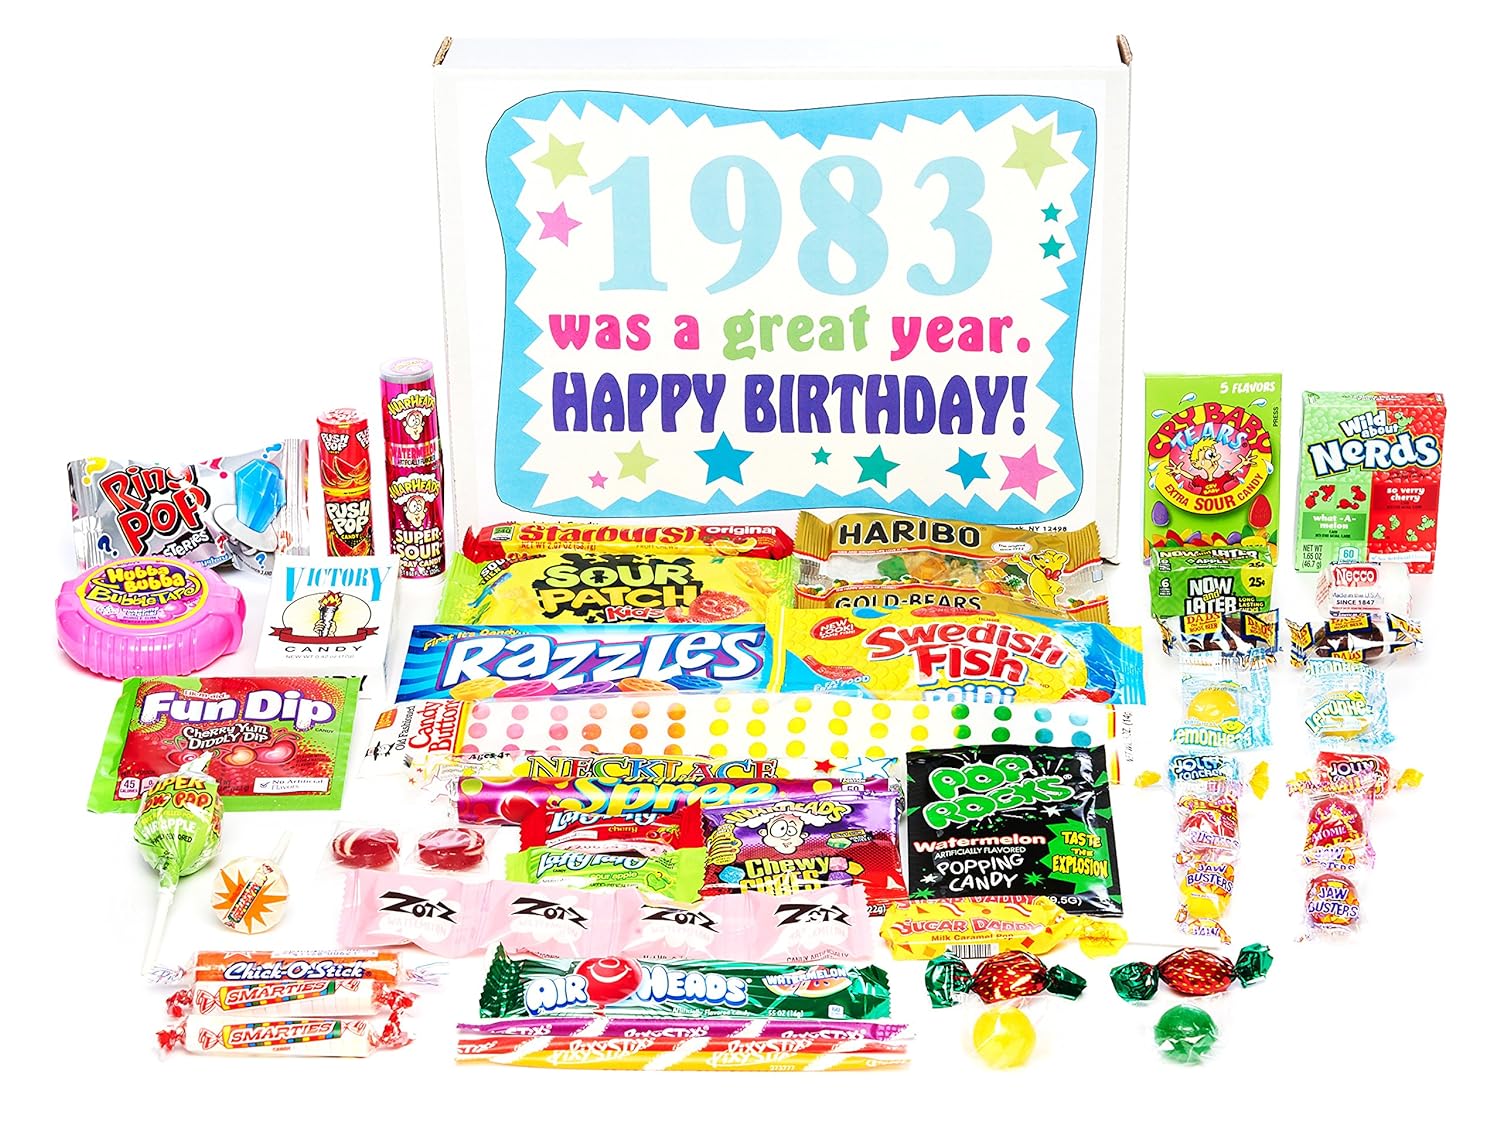 Woodstock Candy ~ 1983 37th Birthday Gift Box of Nostalgic Retro Candy from Childhood for 37 Year Old Man or Woman Born 1983